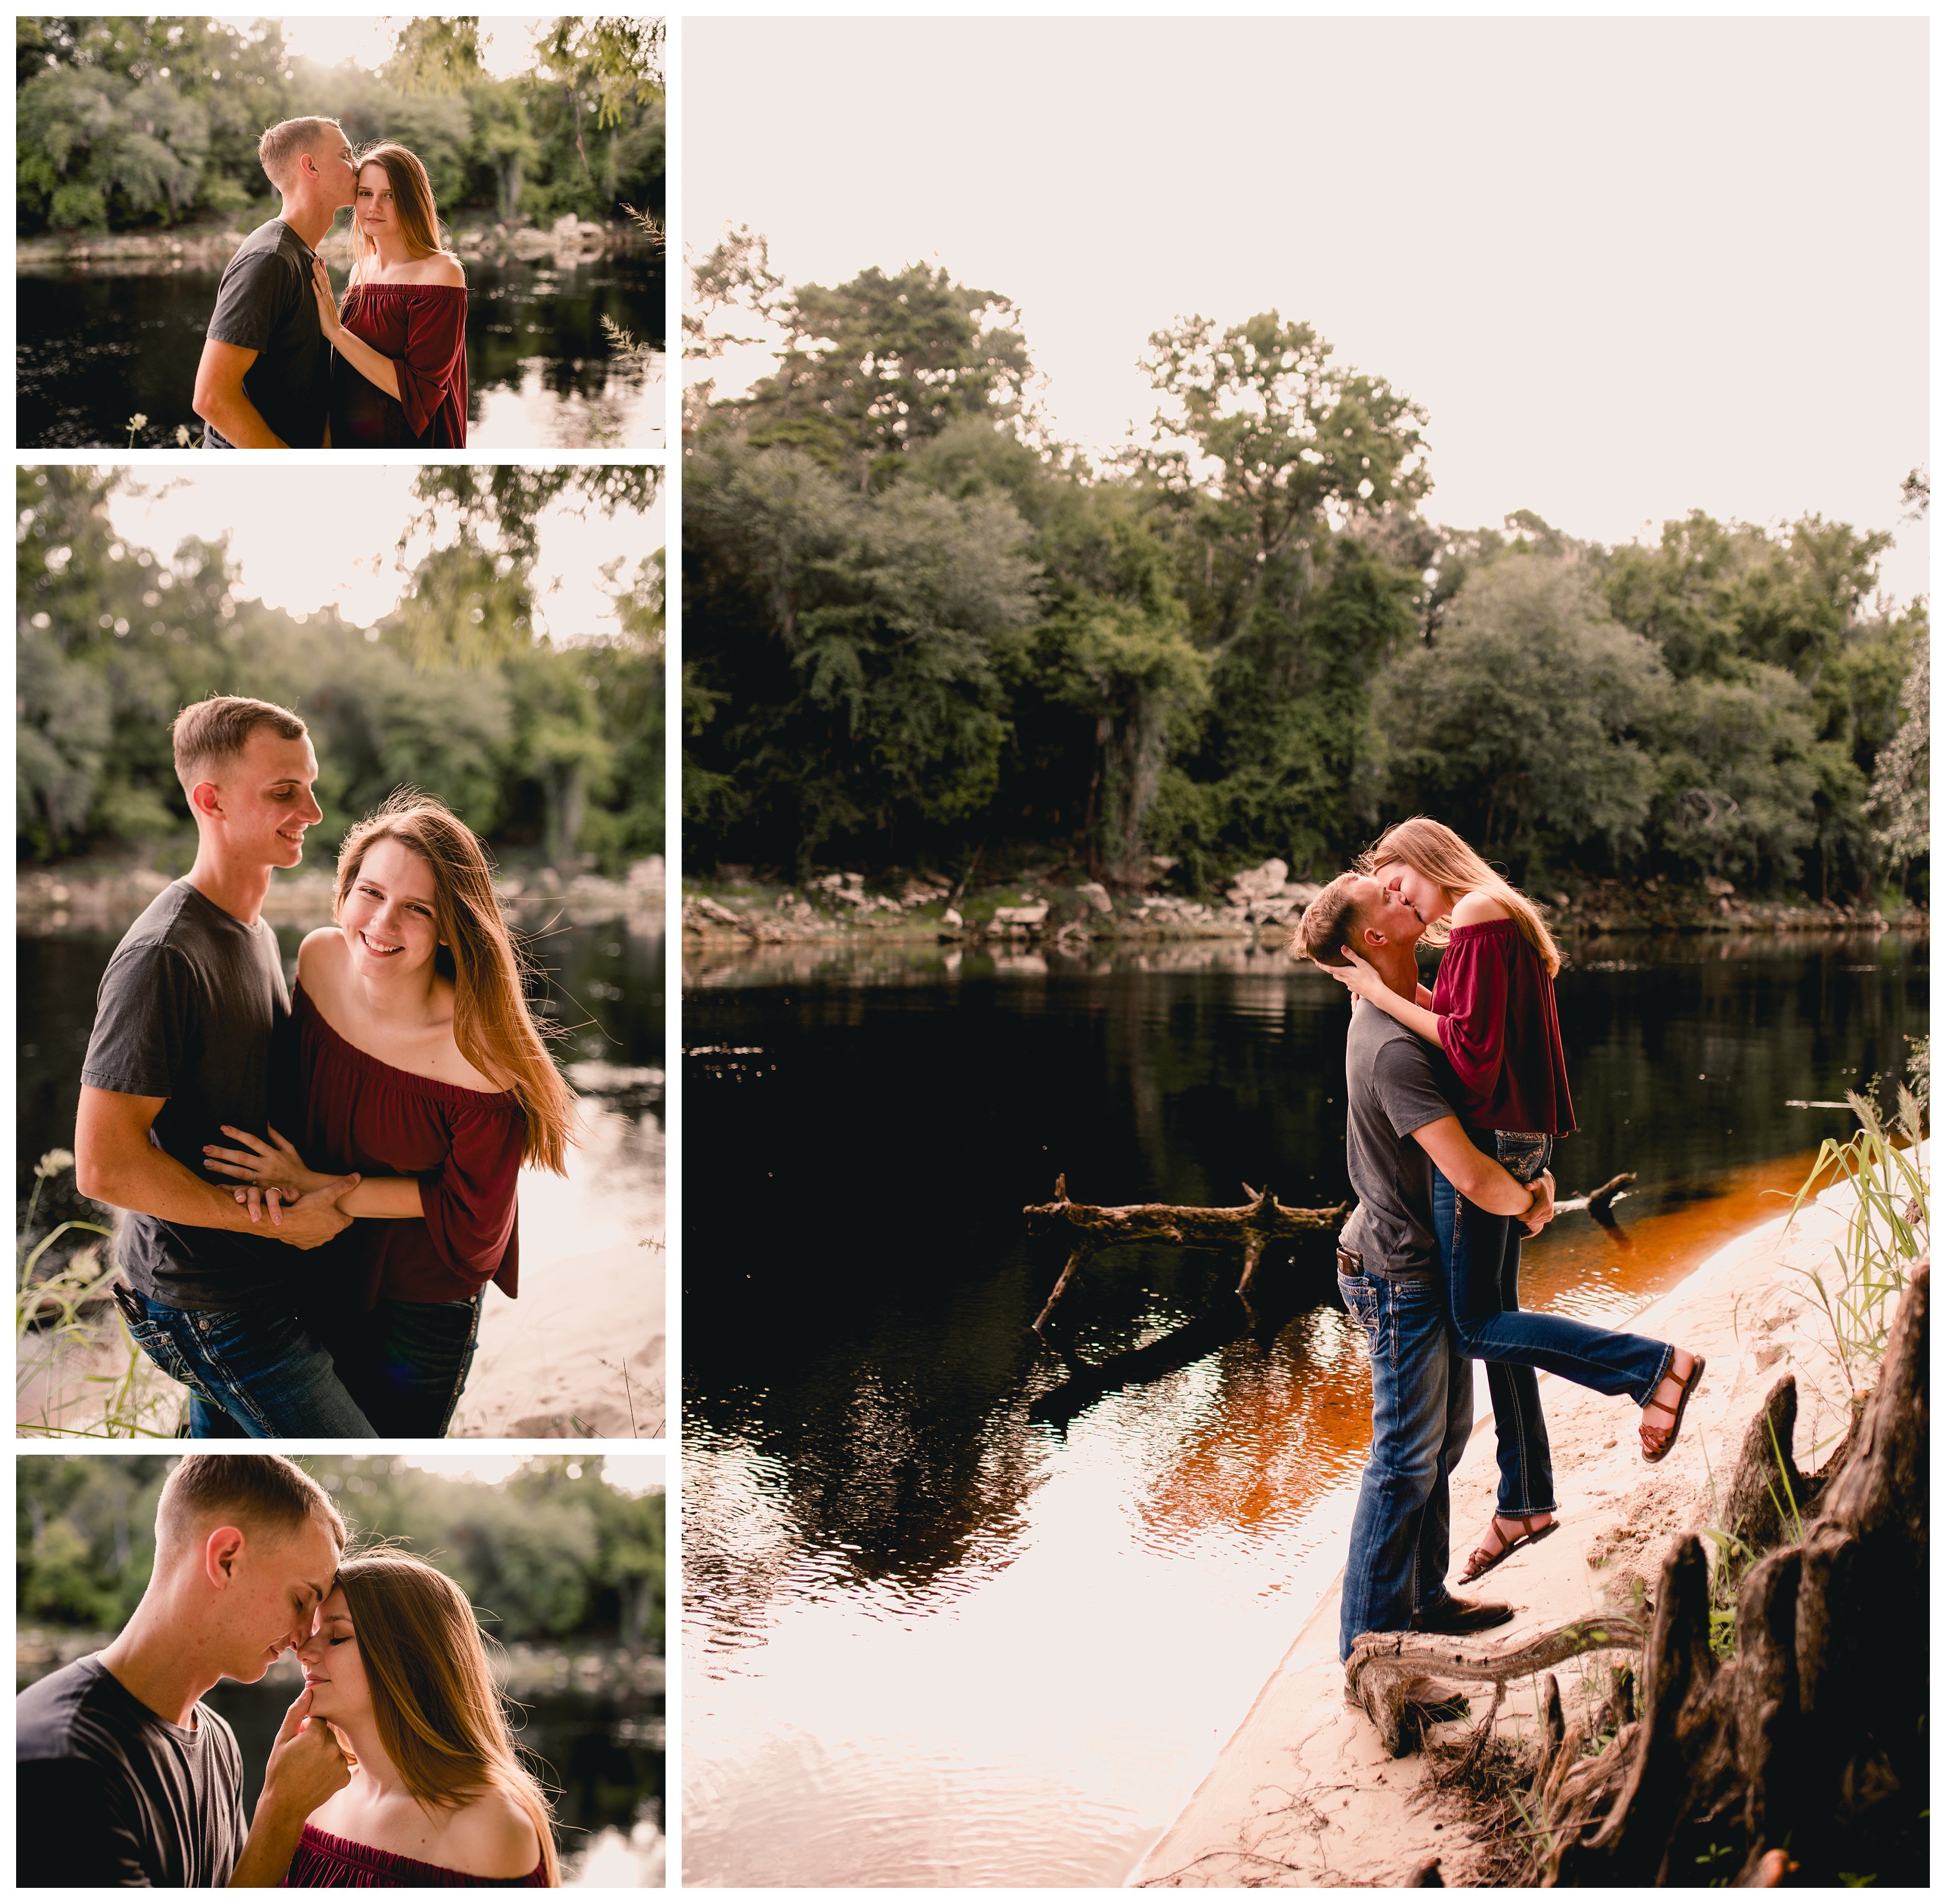 Posing ideas for engagement photos that are fun and natural